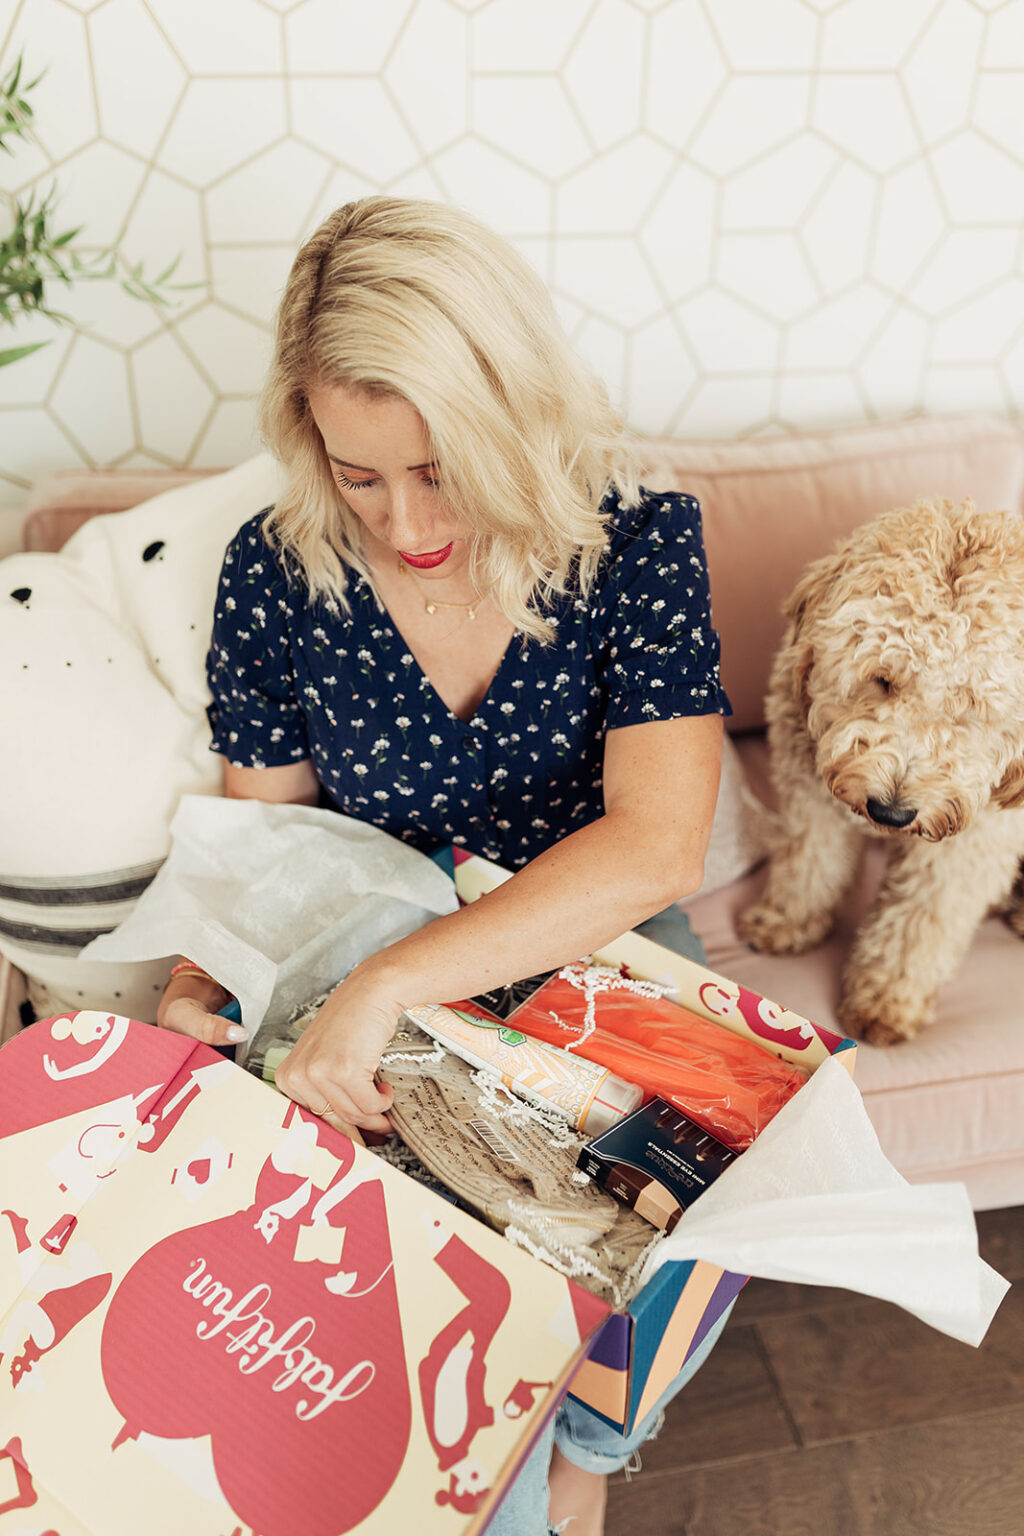 FabFitFun 2019 Box is here and here are the spoilers! Also, save 20% ($10) off your 1st box w/code: TWISTMEPRETTY. We will share the FULL LIST of FabFItFun Summer 2019 Box Spoilers, plus Add-Ons + Customization spoilers, when available!